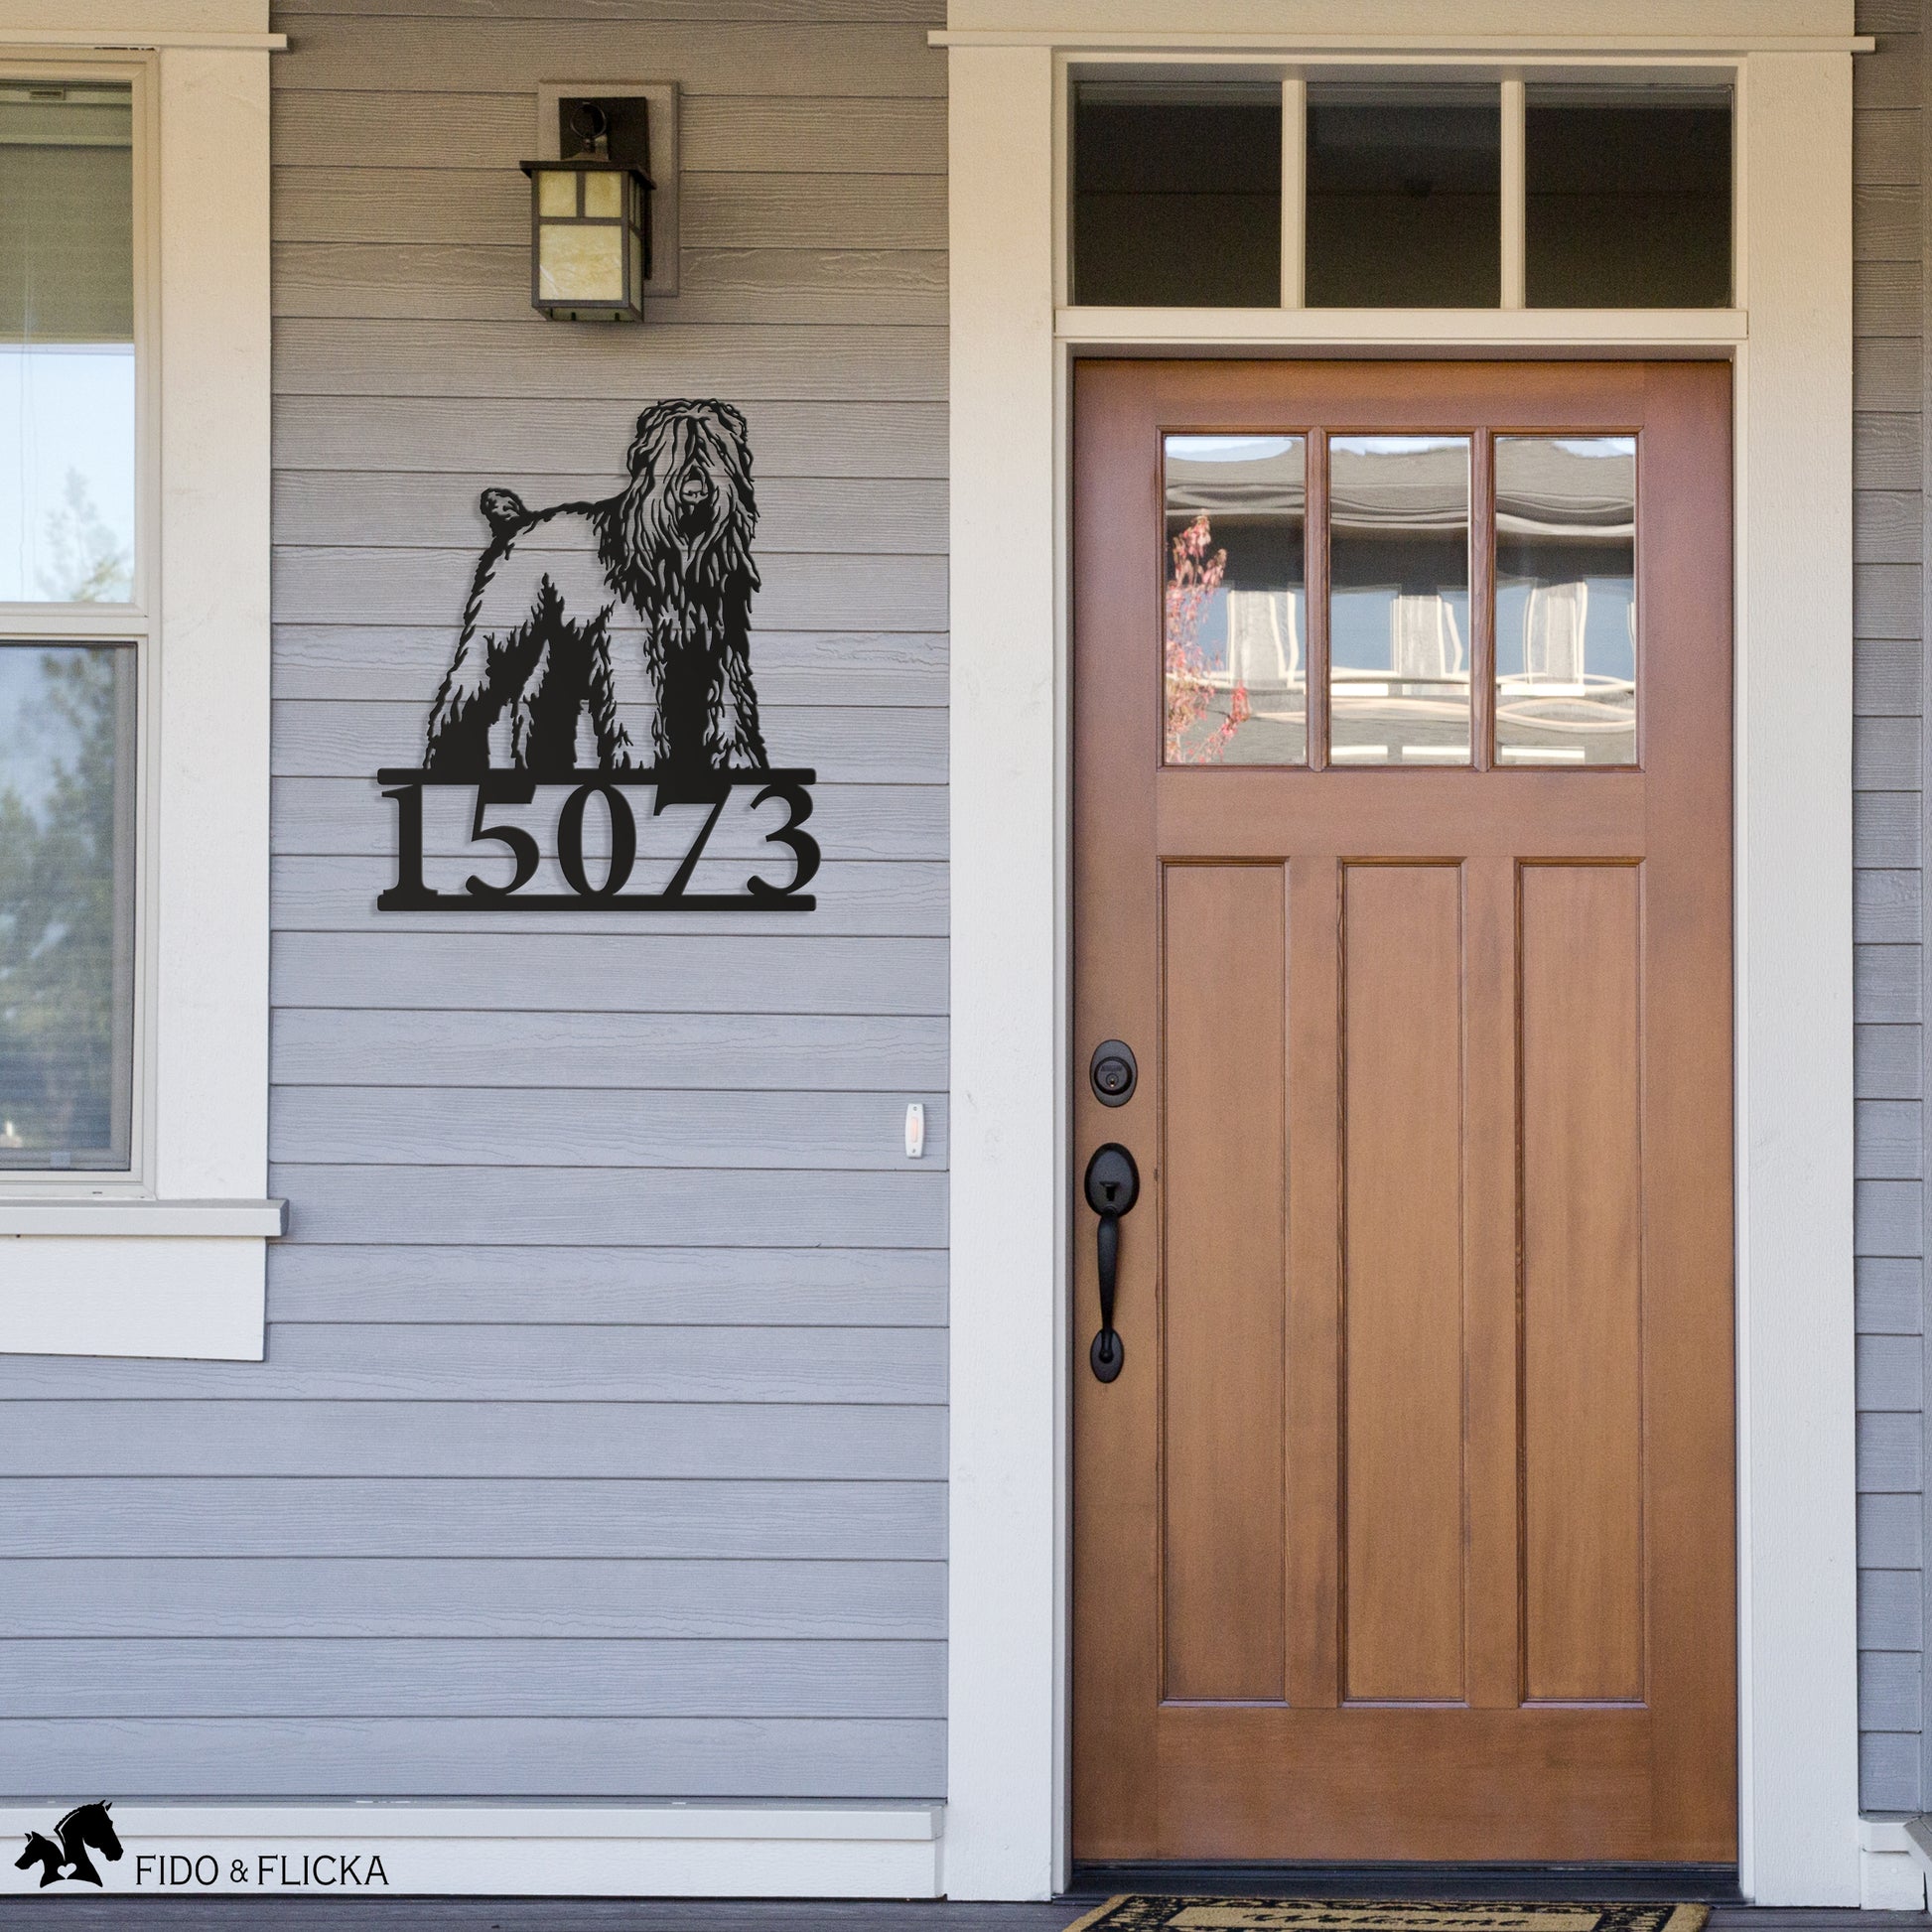 Black Russian Terrier house number sign by front door